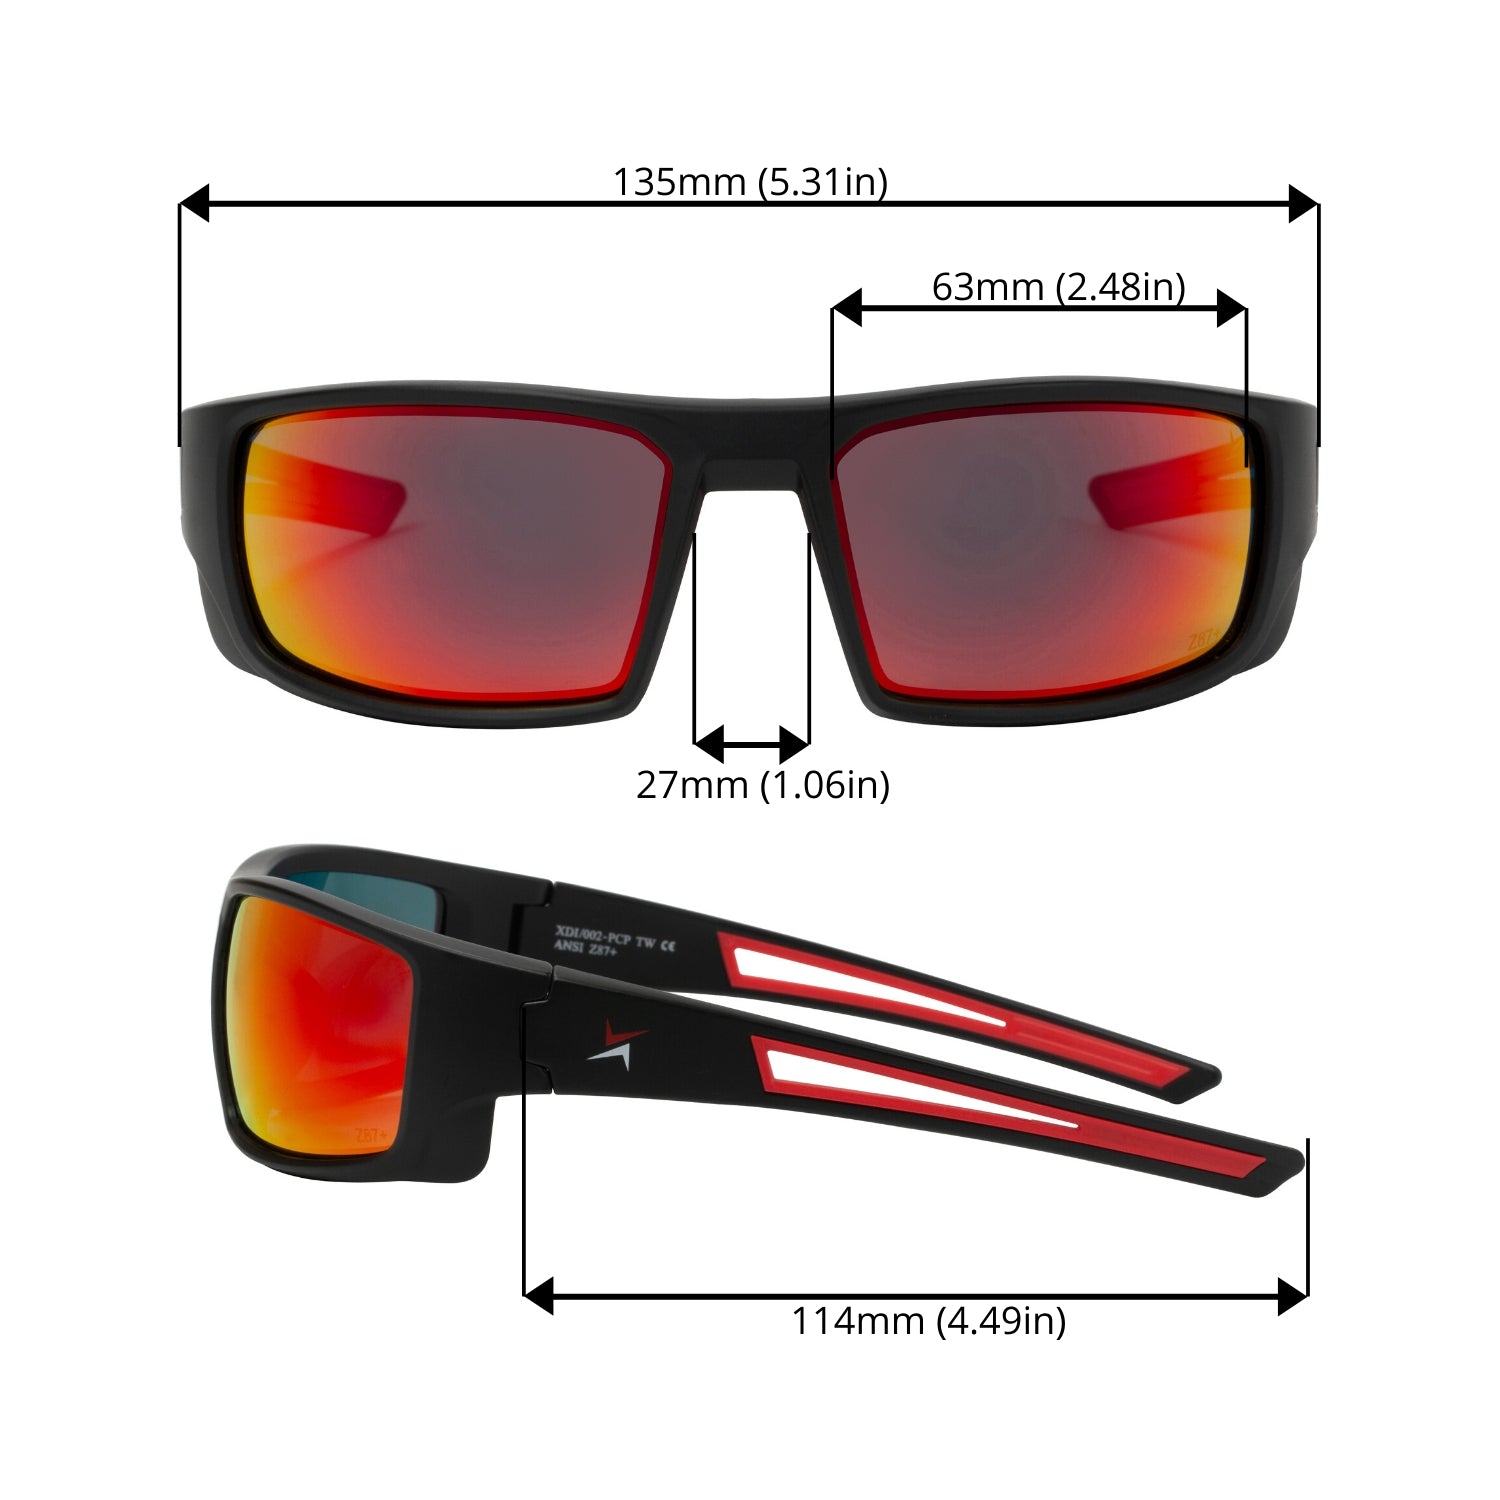 Polycarbonate Polarized Red Mirror Lens Sport Safety Glasses with Red Rubber Accents.